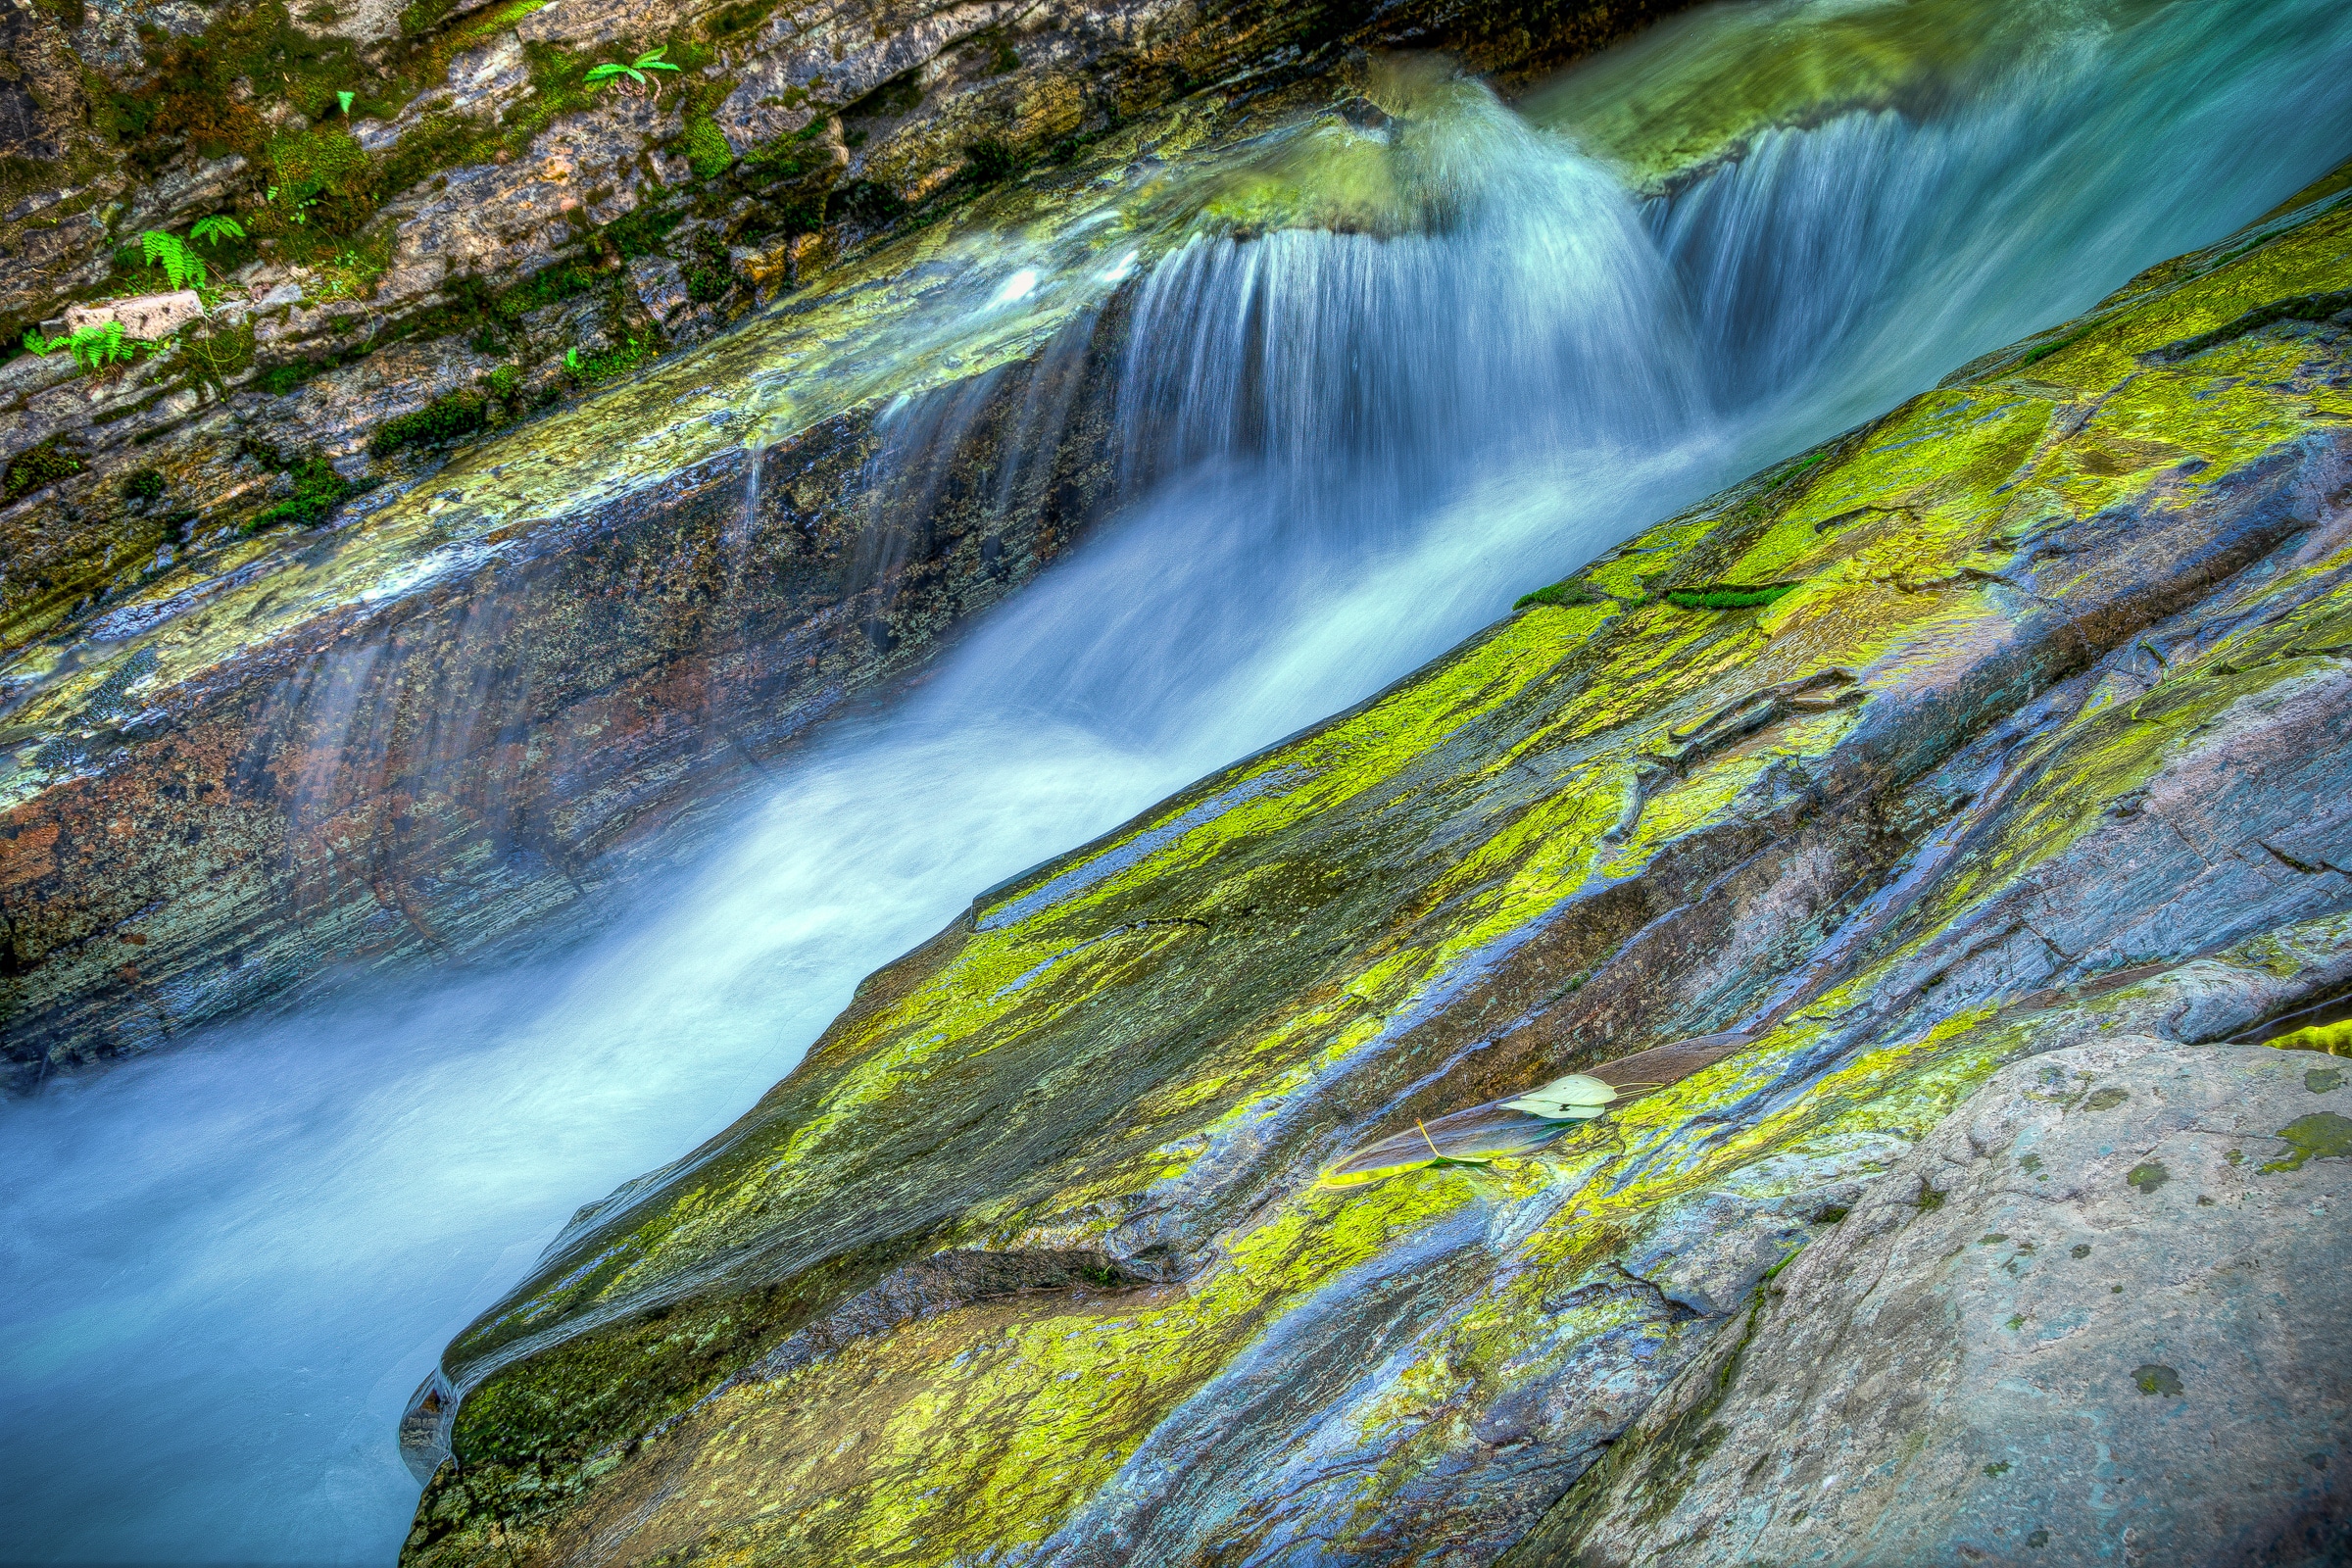 Water splashes along the cascade flowing through Sunrift Gorge in Glacier National Park, Montana.